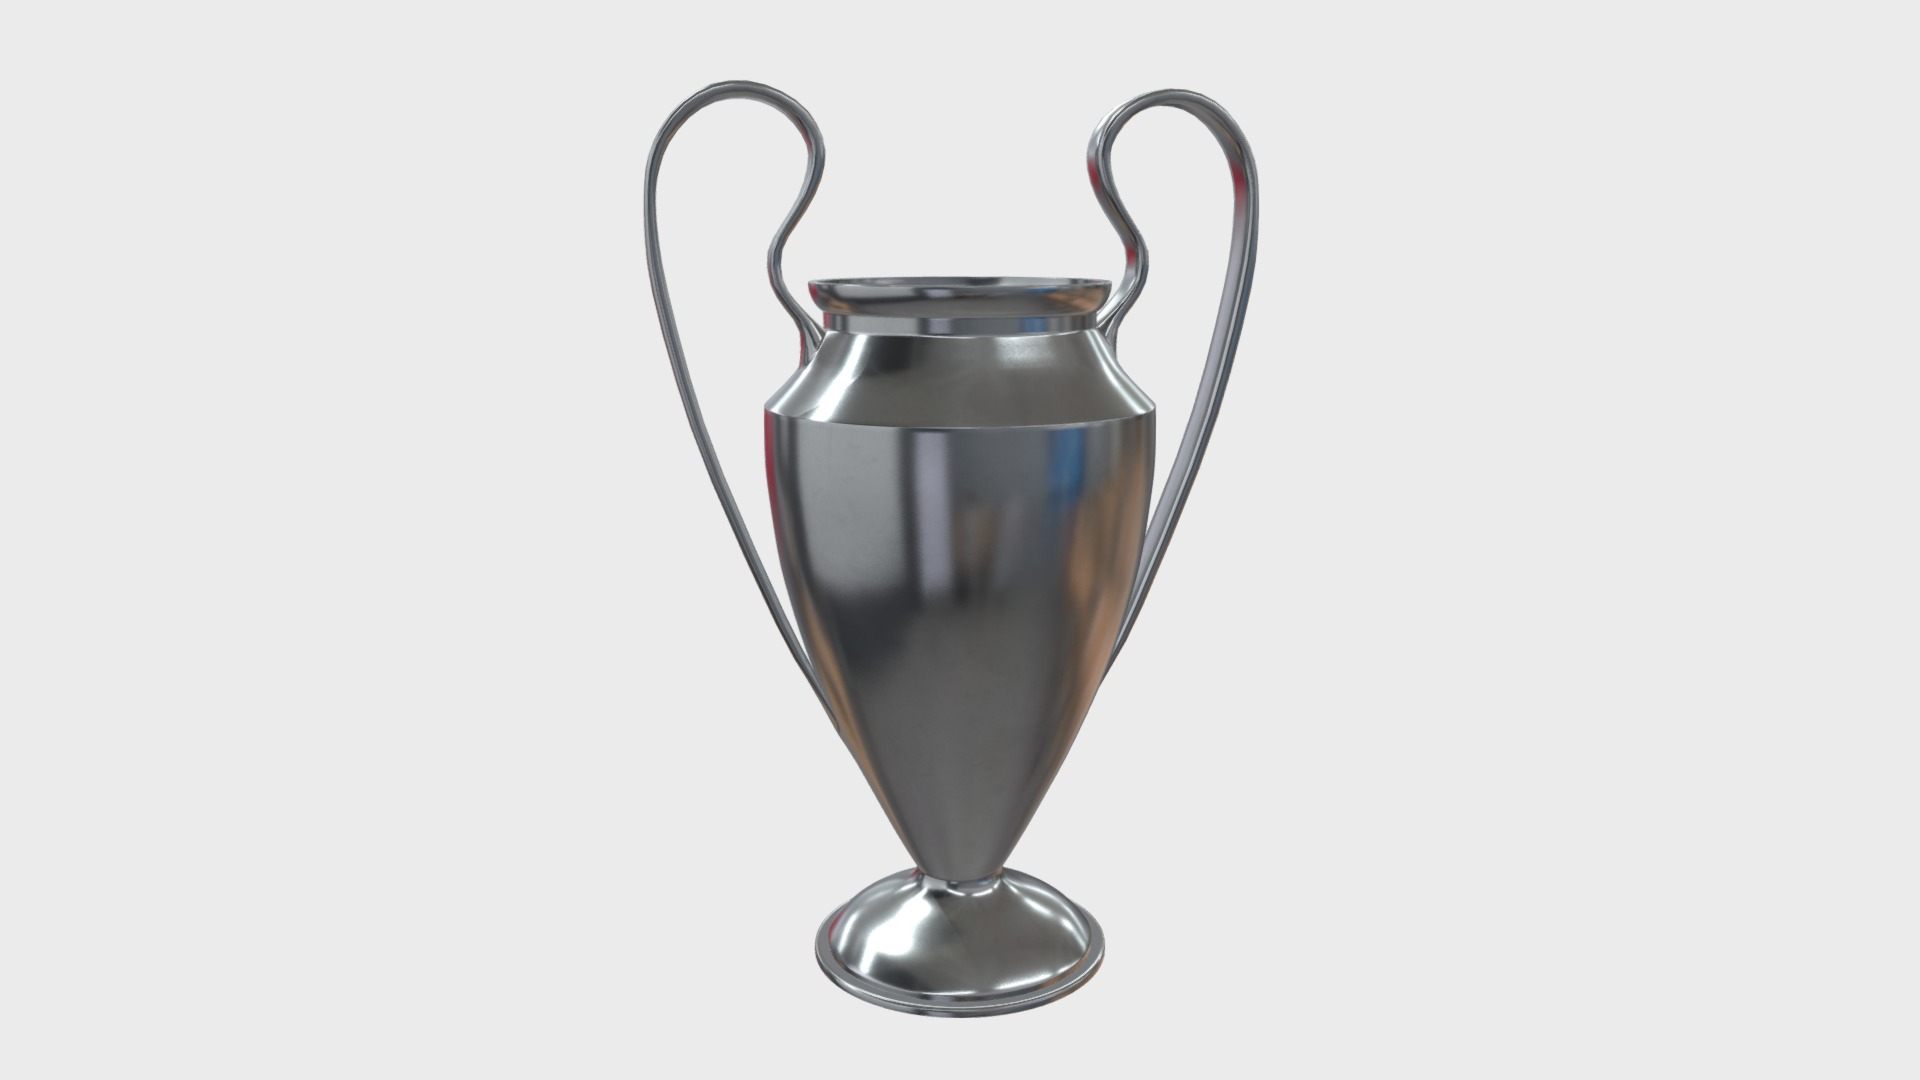 3D model Sport trophy cup - This is a 3D model of the Sport trophy cup. The 3D model is about a silver and black metal cup.